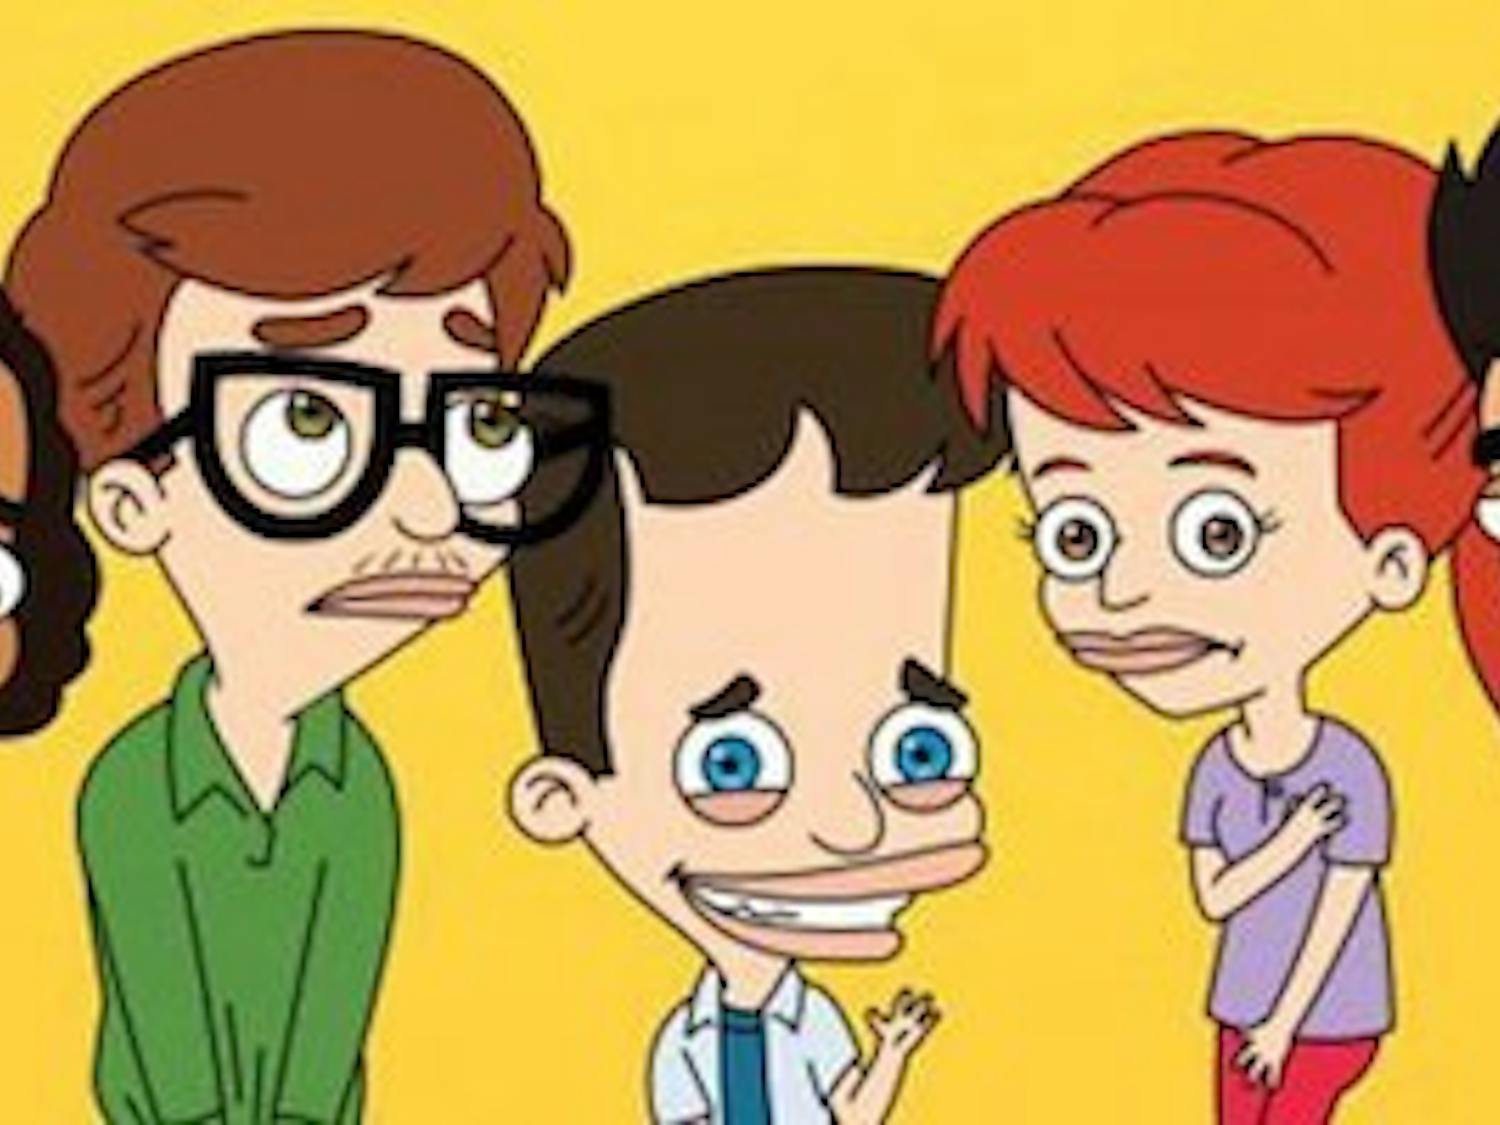 Netflix's new animated comedy, "Big Mouth," released Sept. 29, is available to stream.